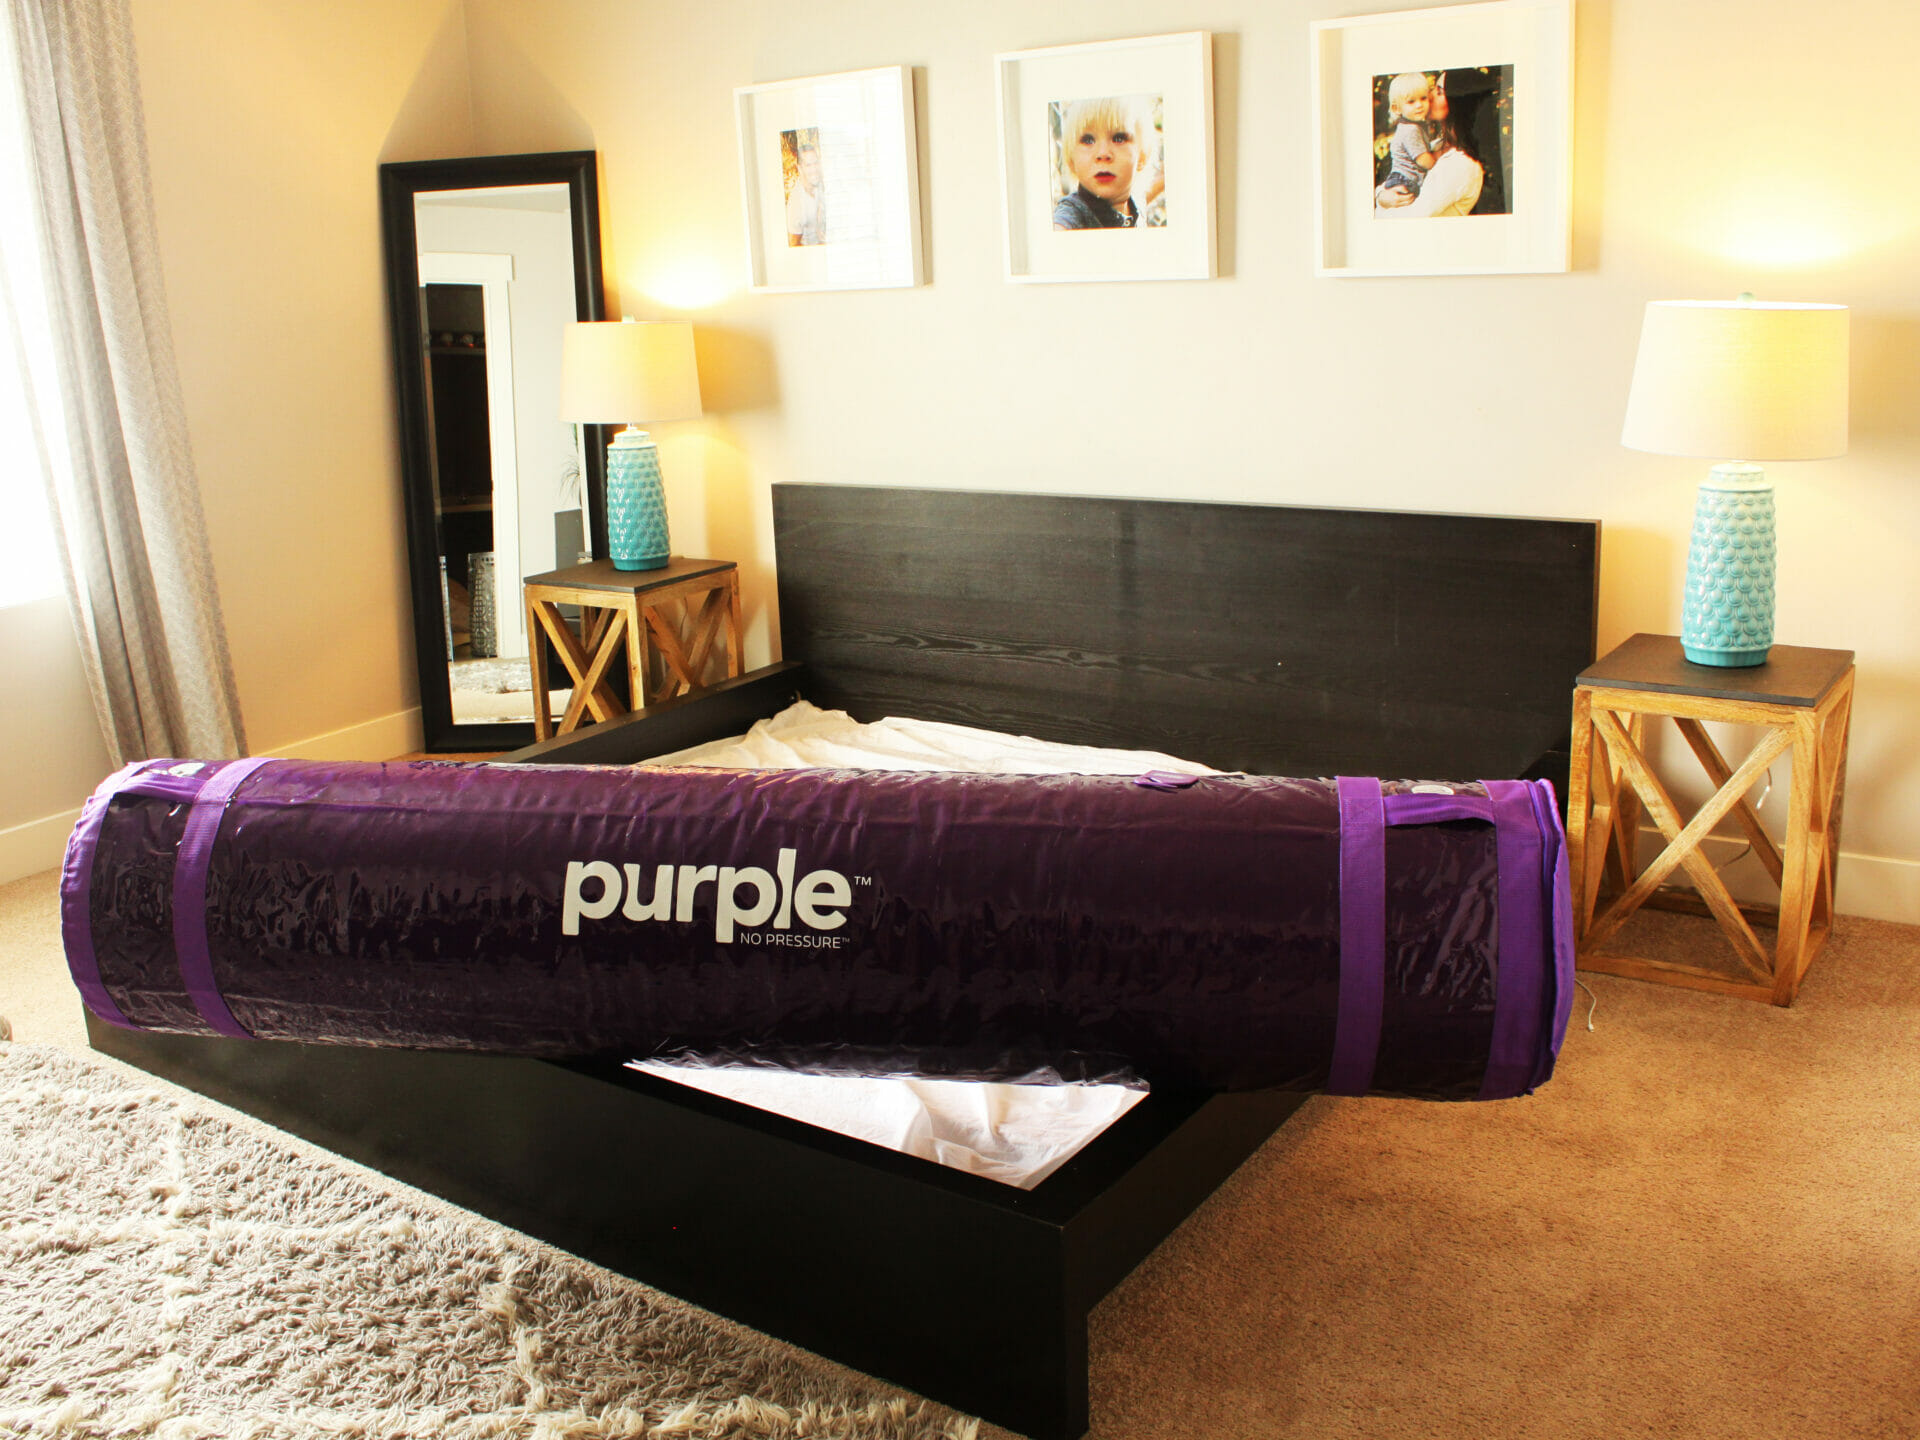 The most comfortable mattress I have ever tried!